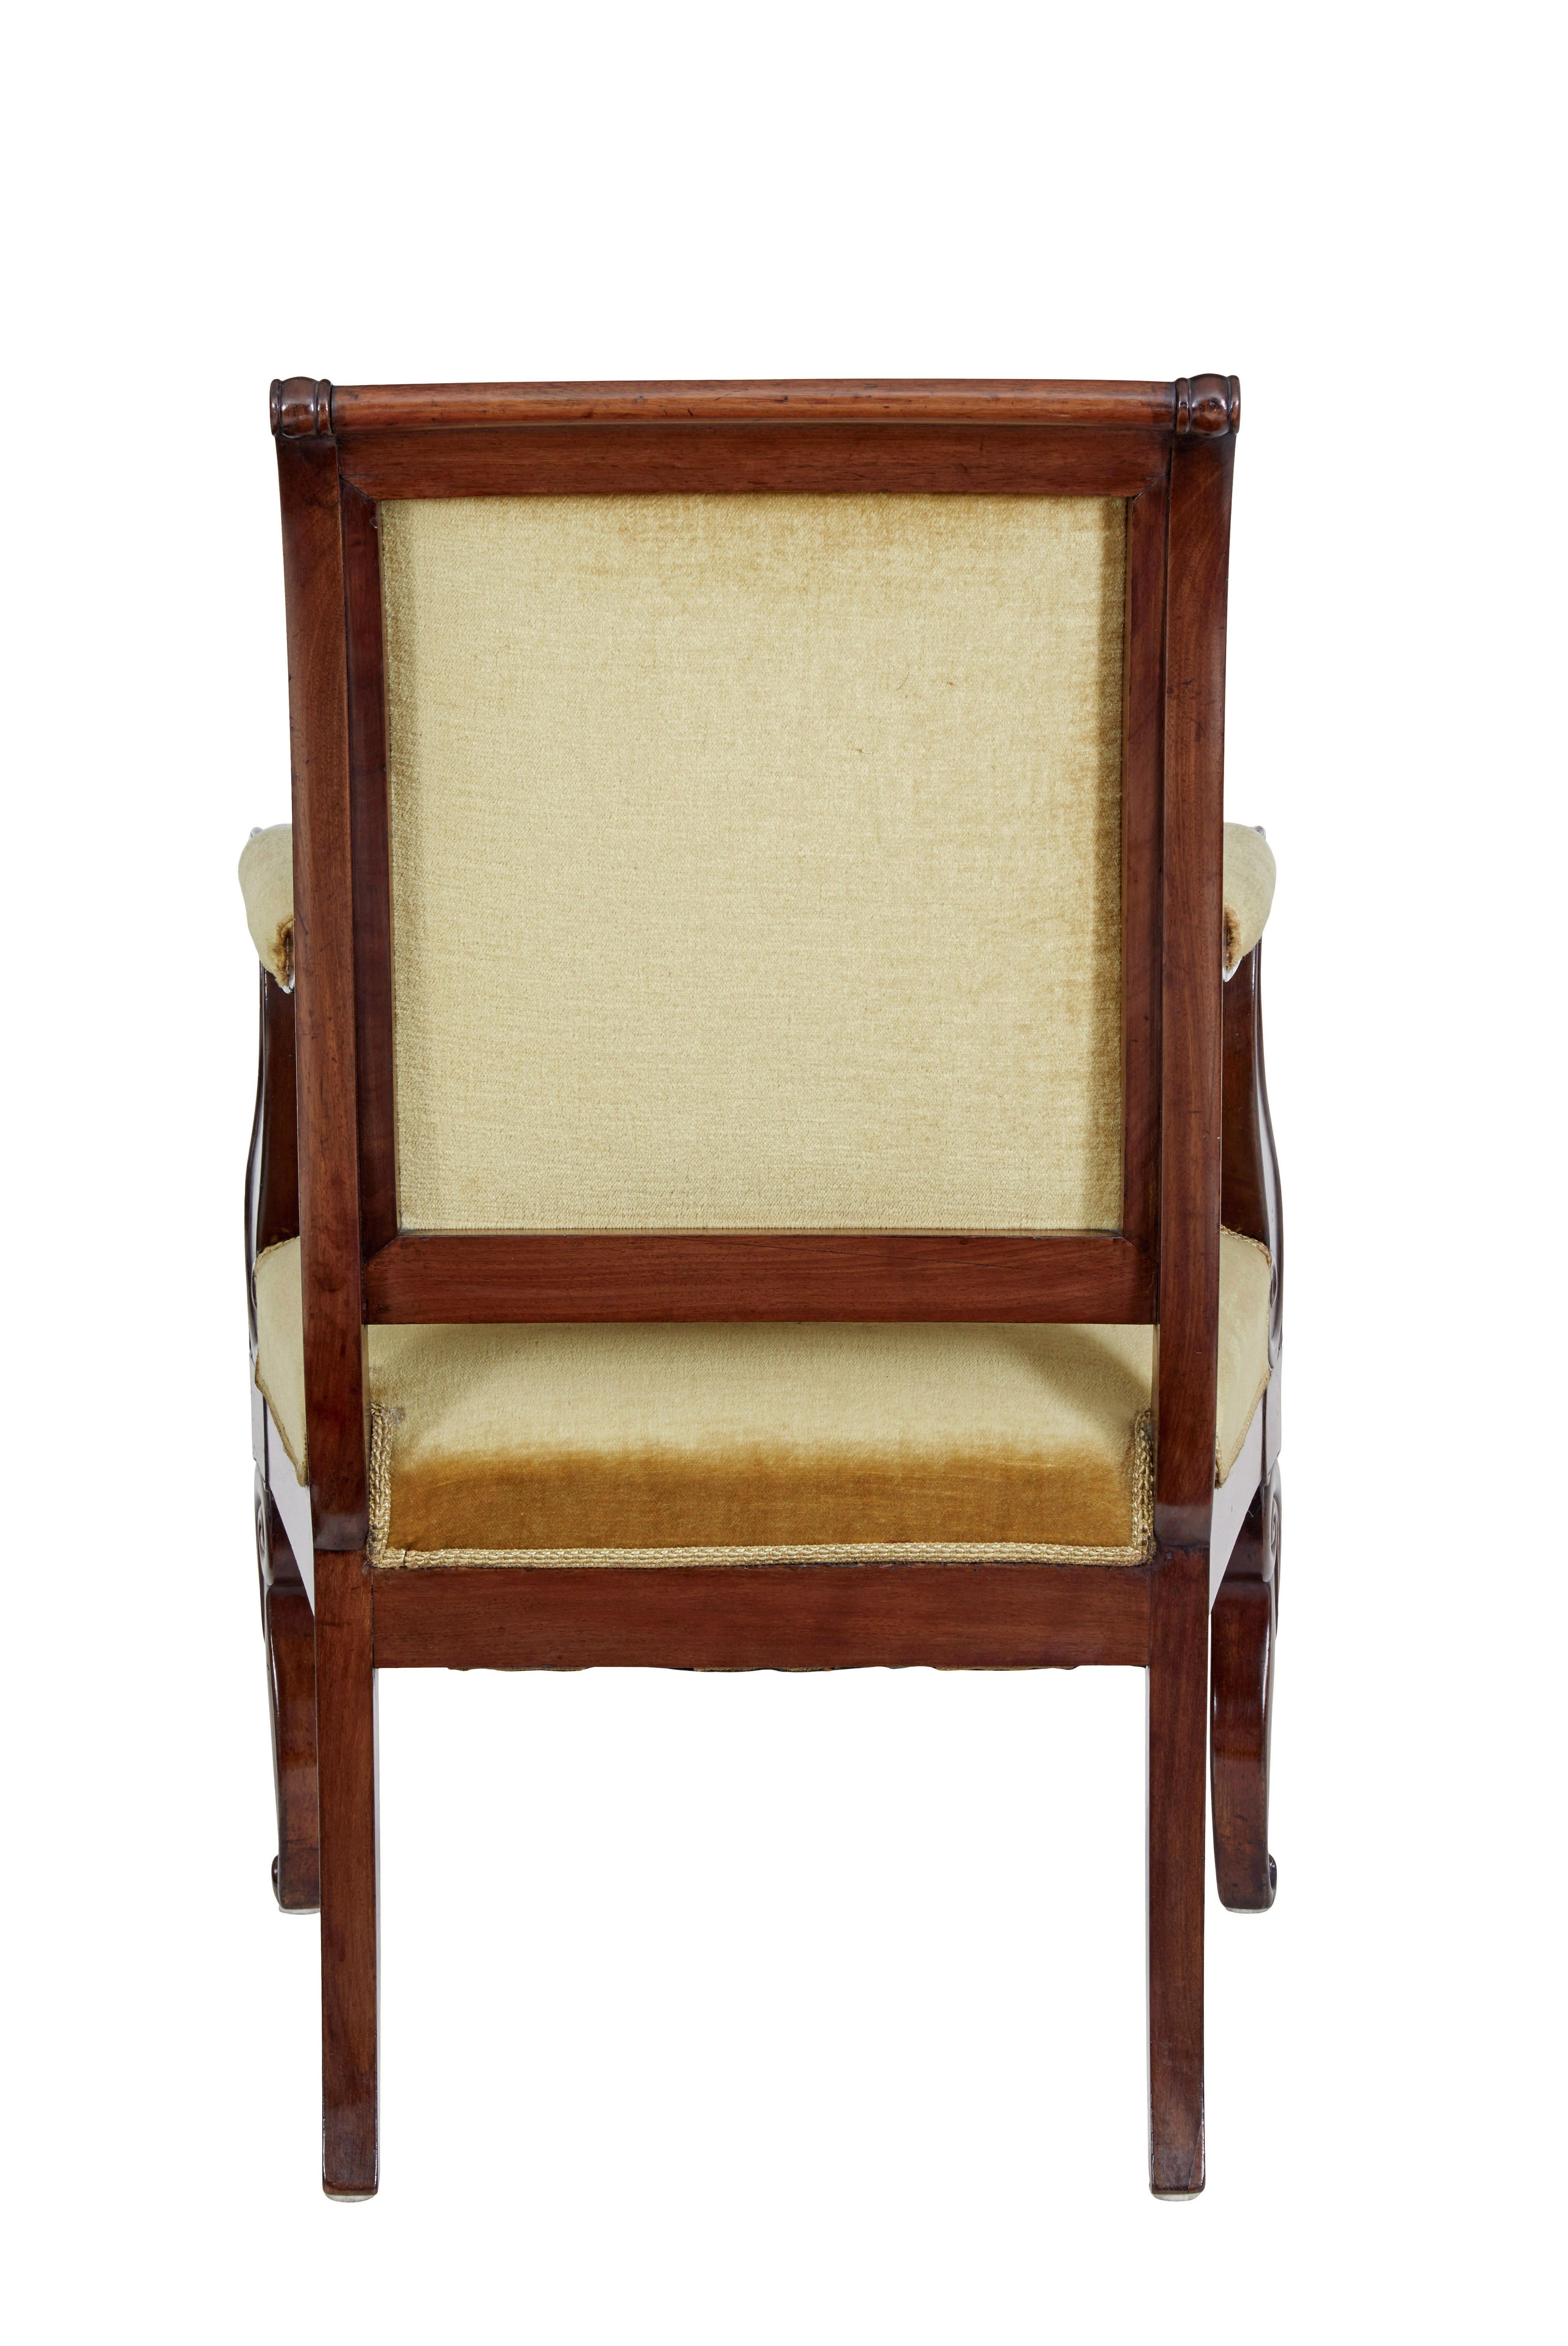 Empire 19th century French empire mahogany armchair For Sale